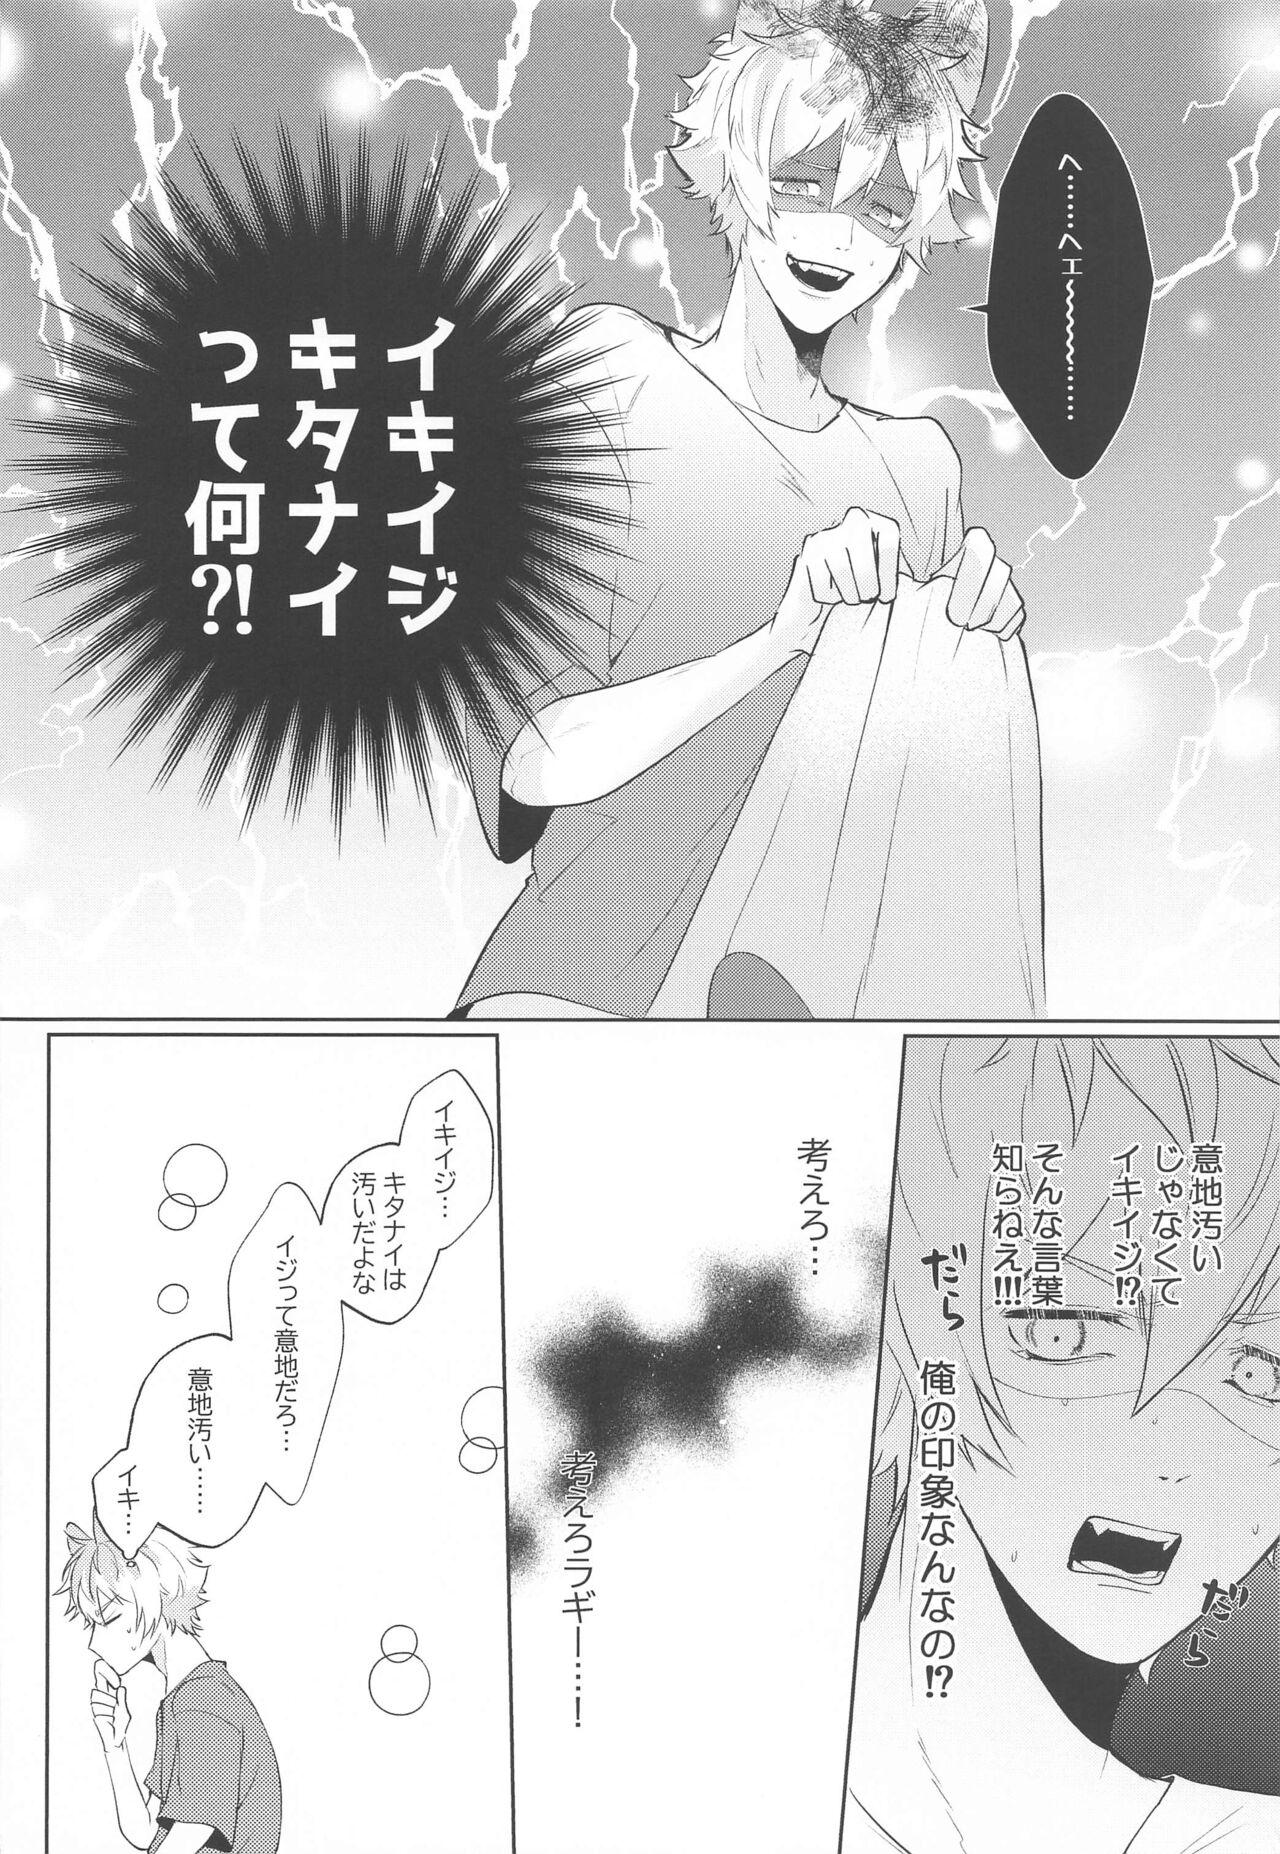 Gorgeous Kanchigai Over Run!! - over run from a misunderstanding - Disney twisted-wonderland Fisting - Page 5